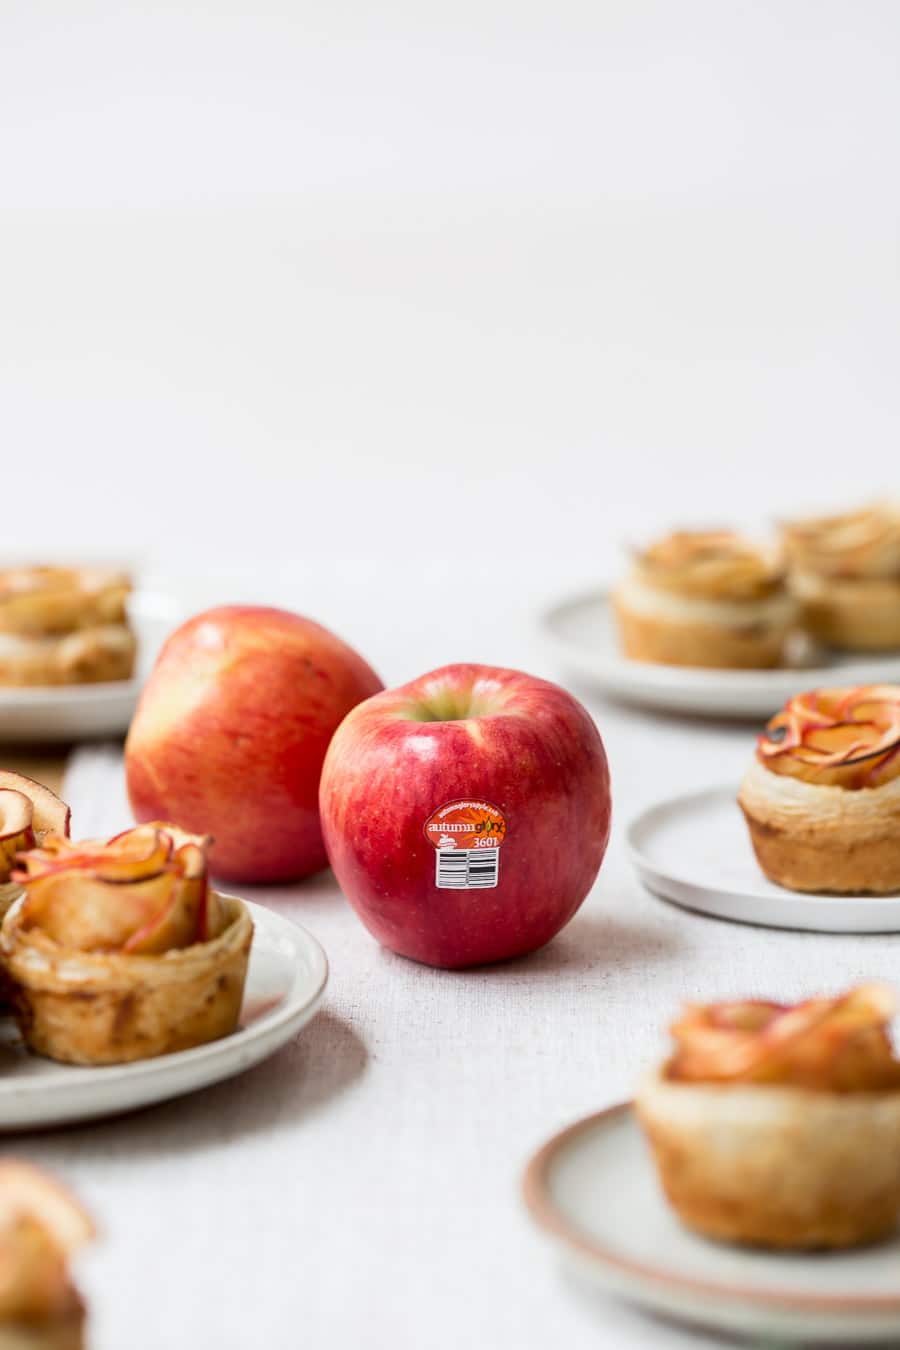 How To Make Baked Apples in Puff Pastry - Showcasing Autumn Glory Apples 